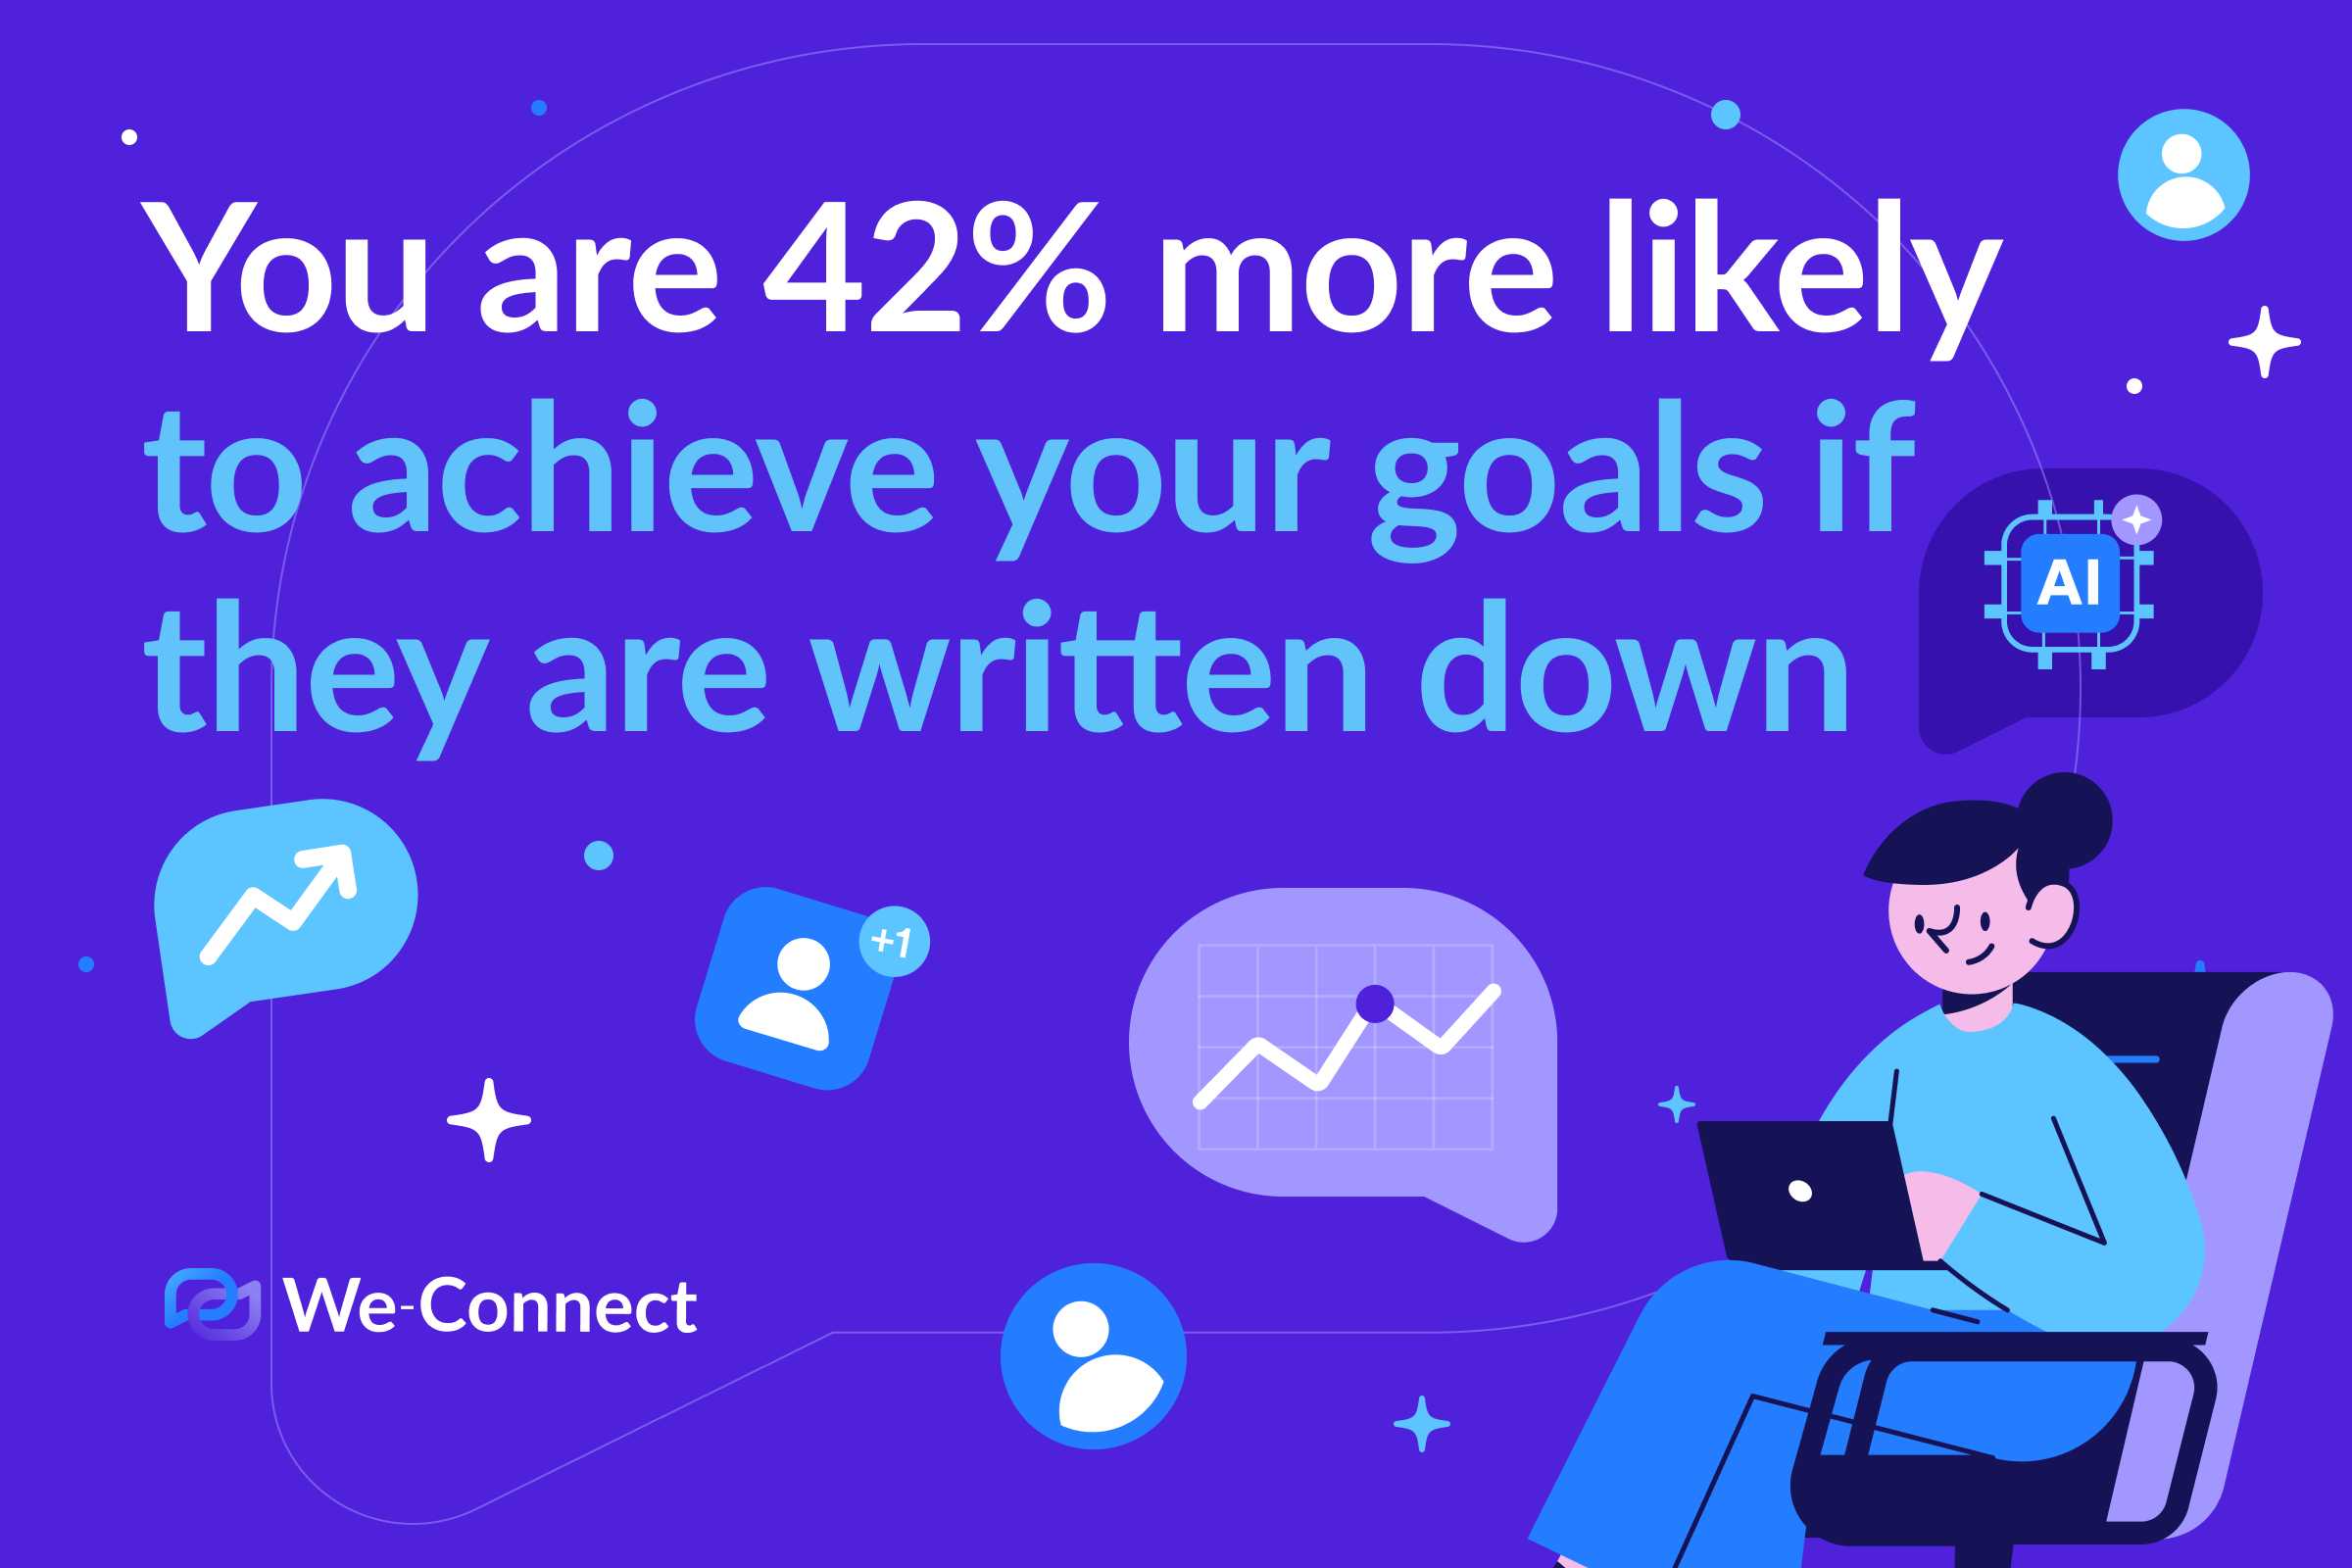 You are 42% more likely to achieve your goals if they are written down